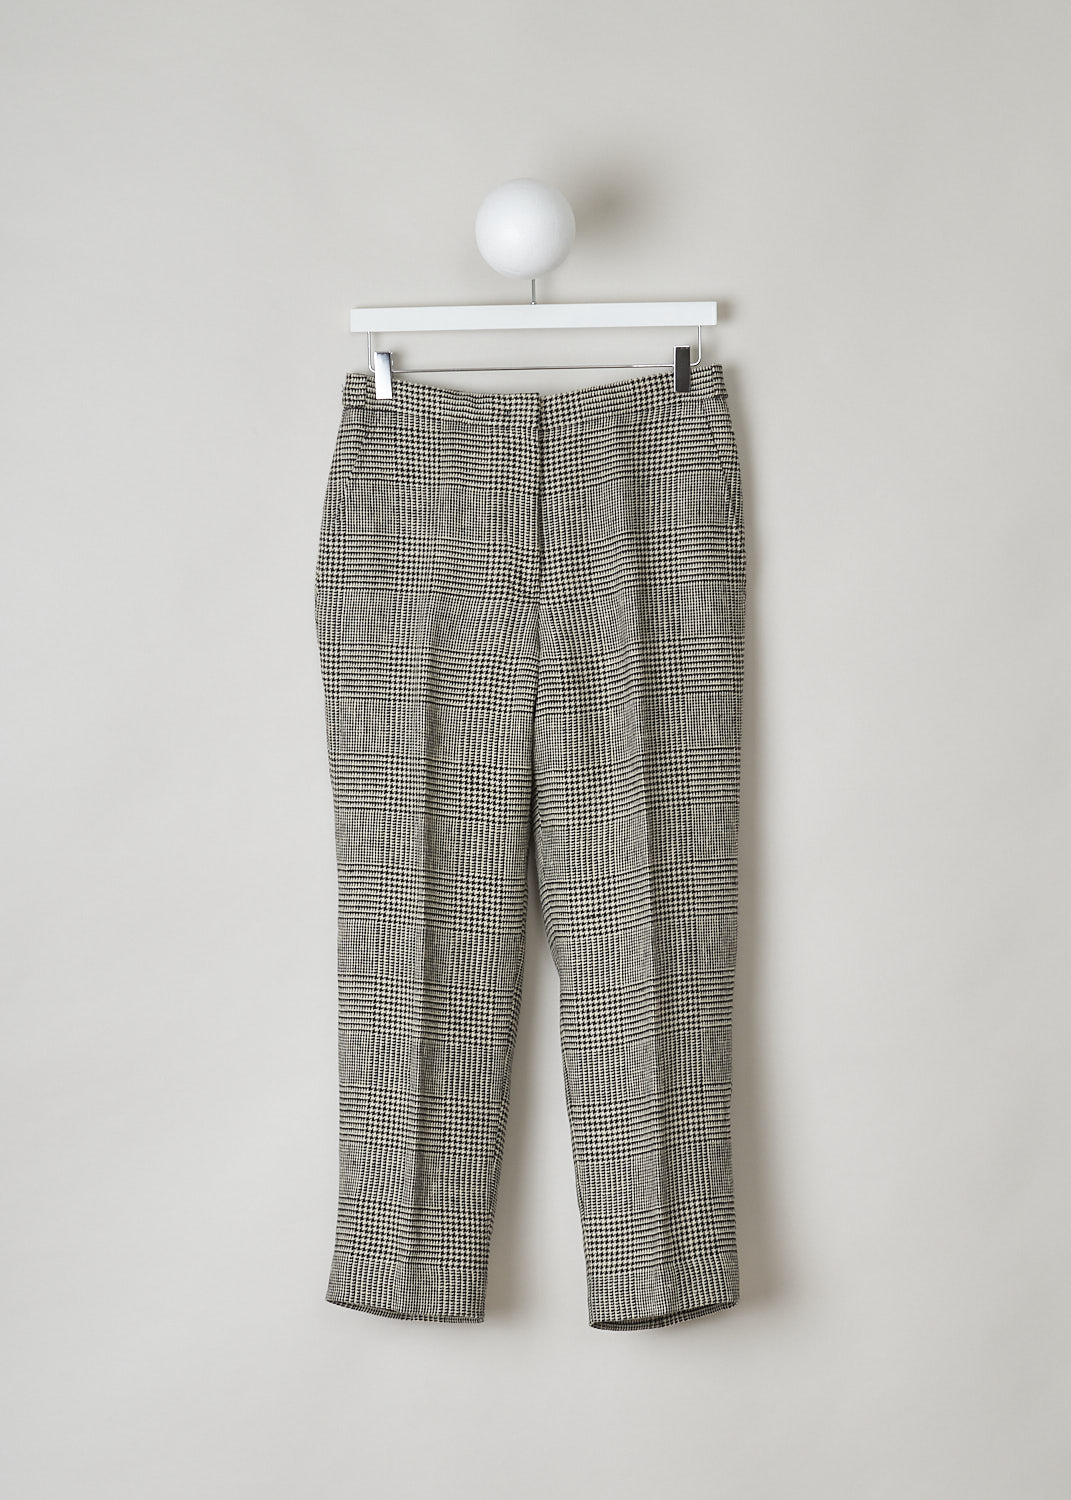 ASPESI, HOUNDSTOOTH PANTS WITH TAPERED LEGS, 0111_G354_F0_40045, Beige, Print, Front, These beige Houndstooth pants have a waistband with in the back, on either side, two buttons that can be used to cinch in the waist. These pants have tapered pant legs with pressed centre creases, a concealed hook and zip closure, slanted pockets in the front and welt flap pockets in the back.
